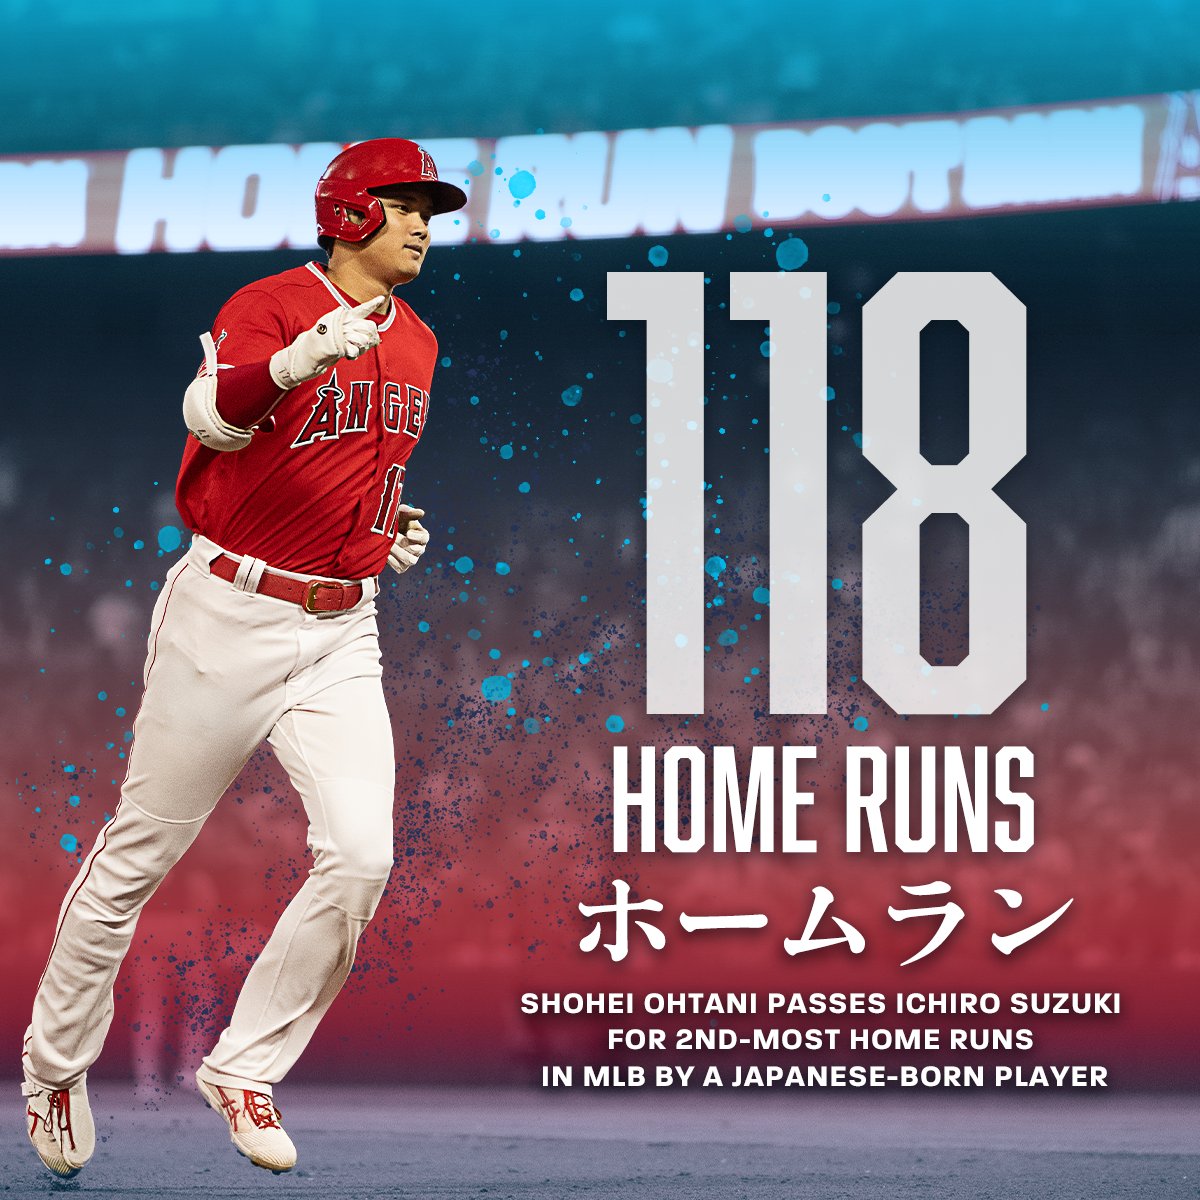 Los Angeles Angels on X: With his 118th home run, Shohei Ohtani